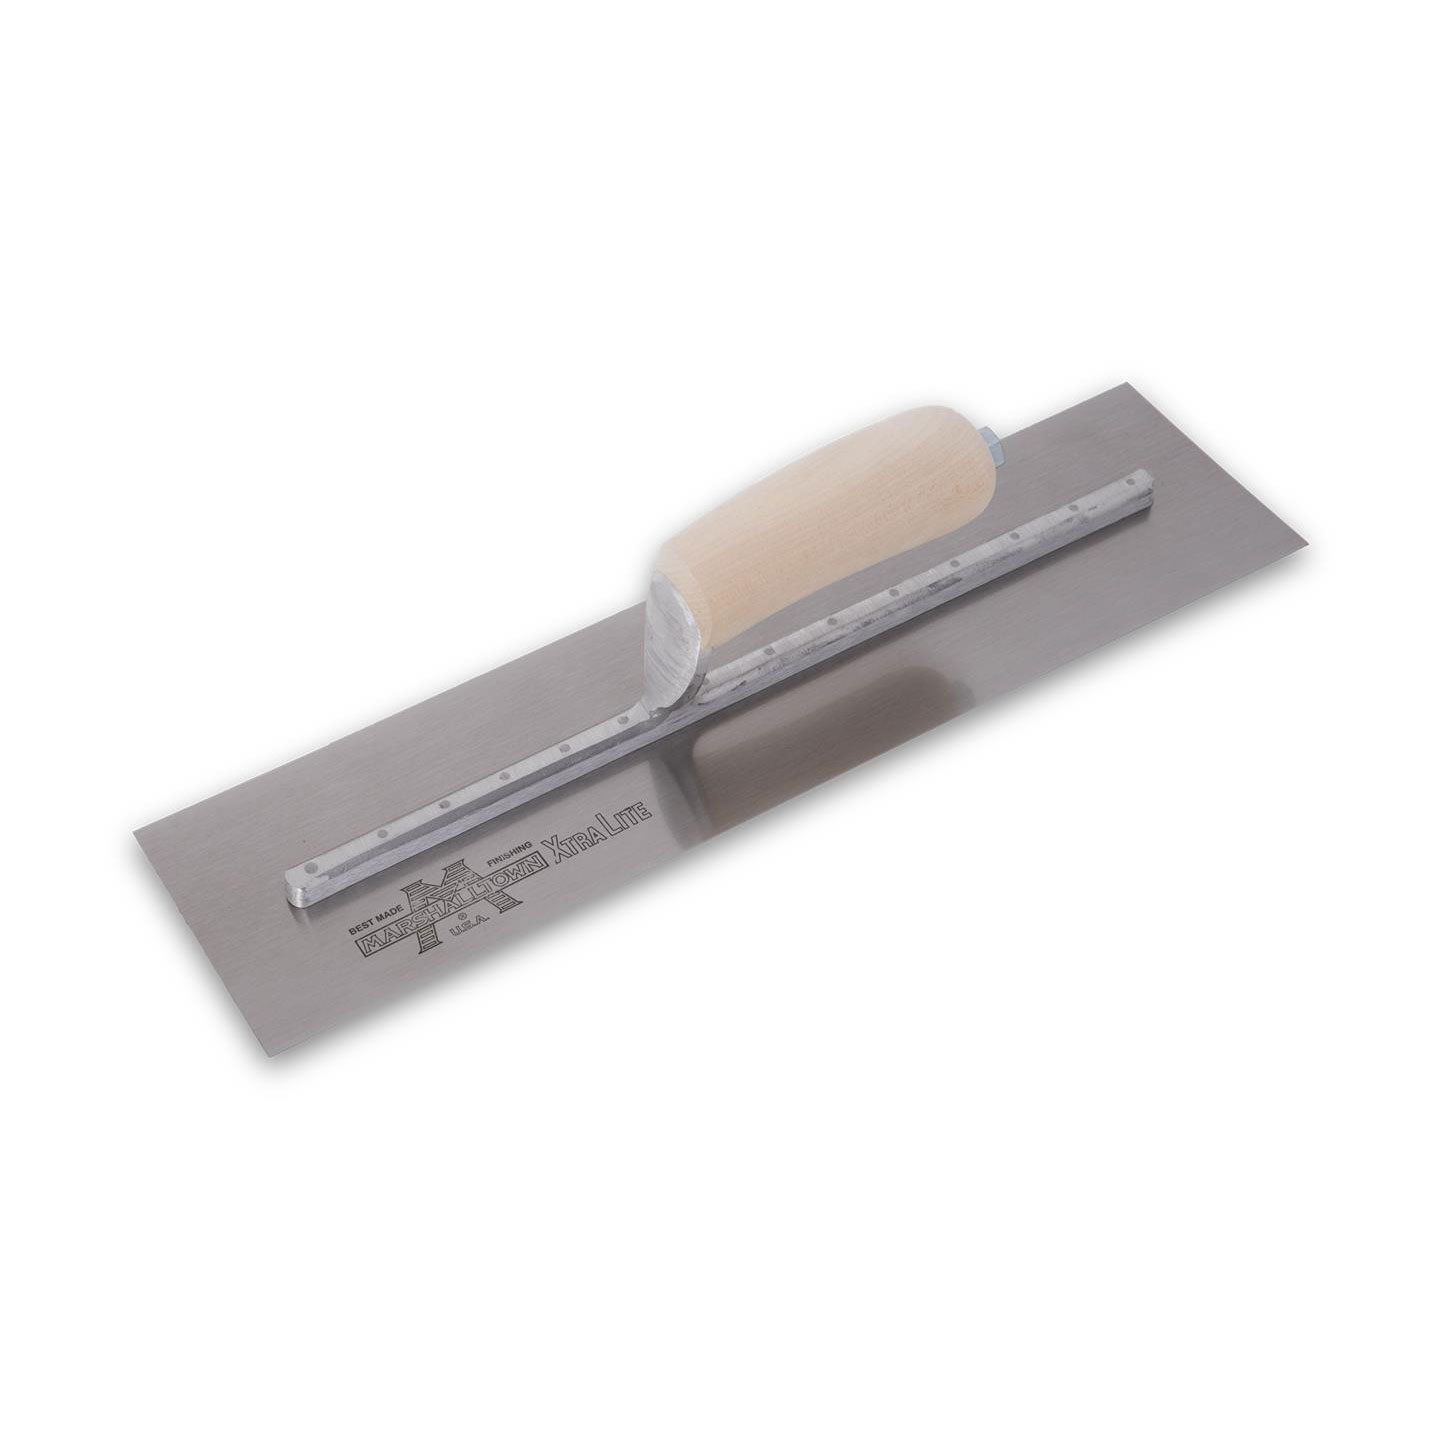 Marshalltown MXS60 16in. x 3in. High Carbon Steel Finishing Trowel with Wood MAT-MXS60